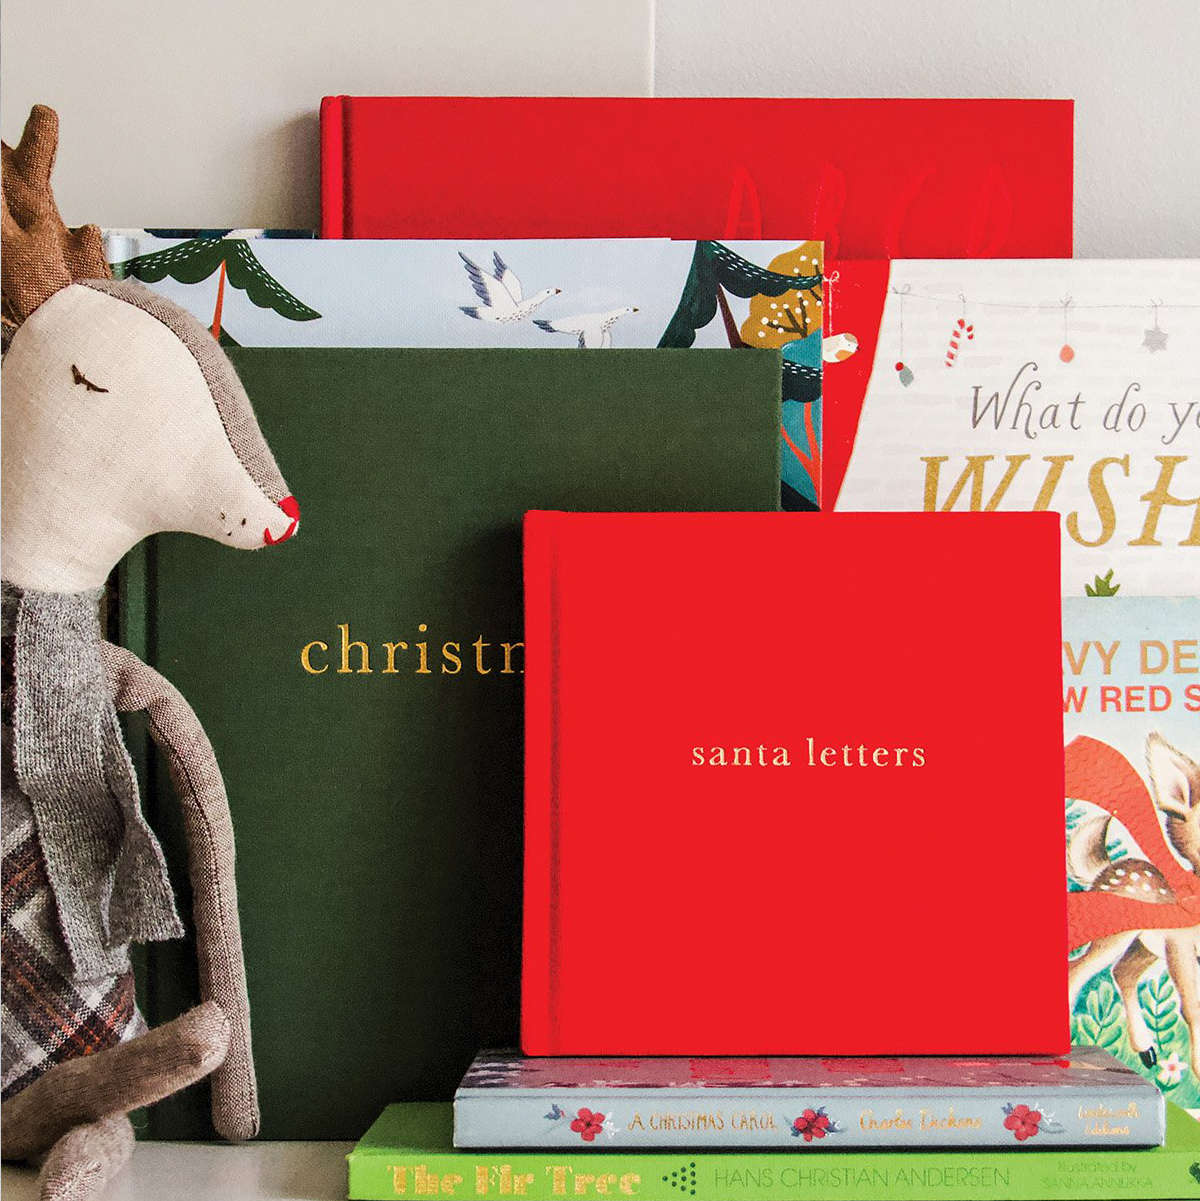 Christmas. Family Christmas Book. Forest Green - Write To Me US